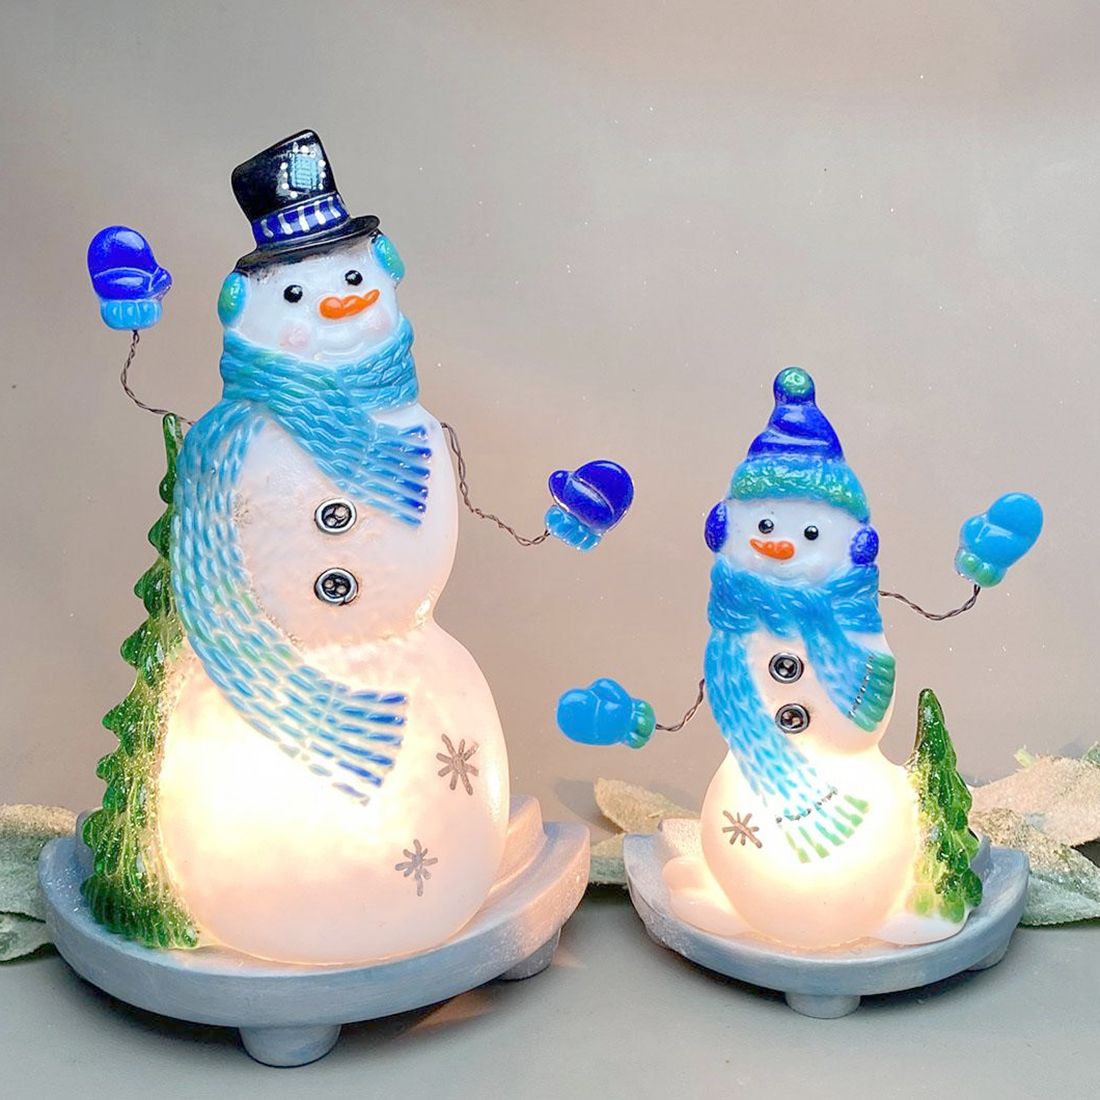 SMALL SNOWMAN MOLD by CPI